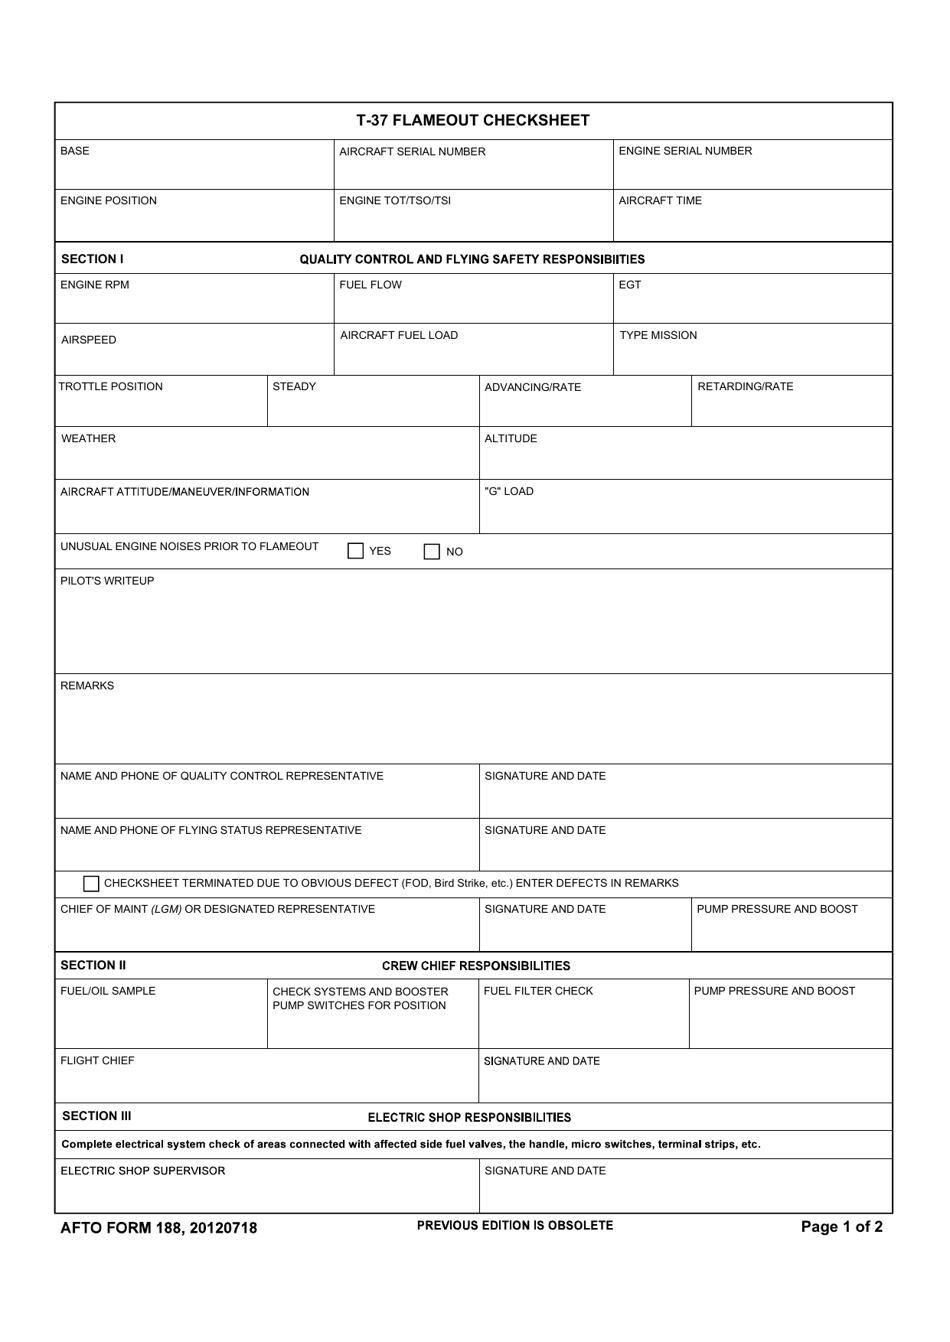 AFTO Form 188 T-37 Flameout Checksheet, Page 1